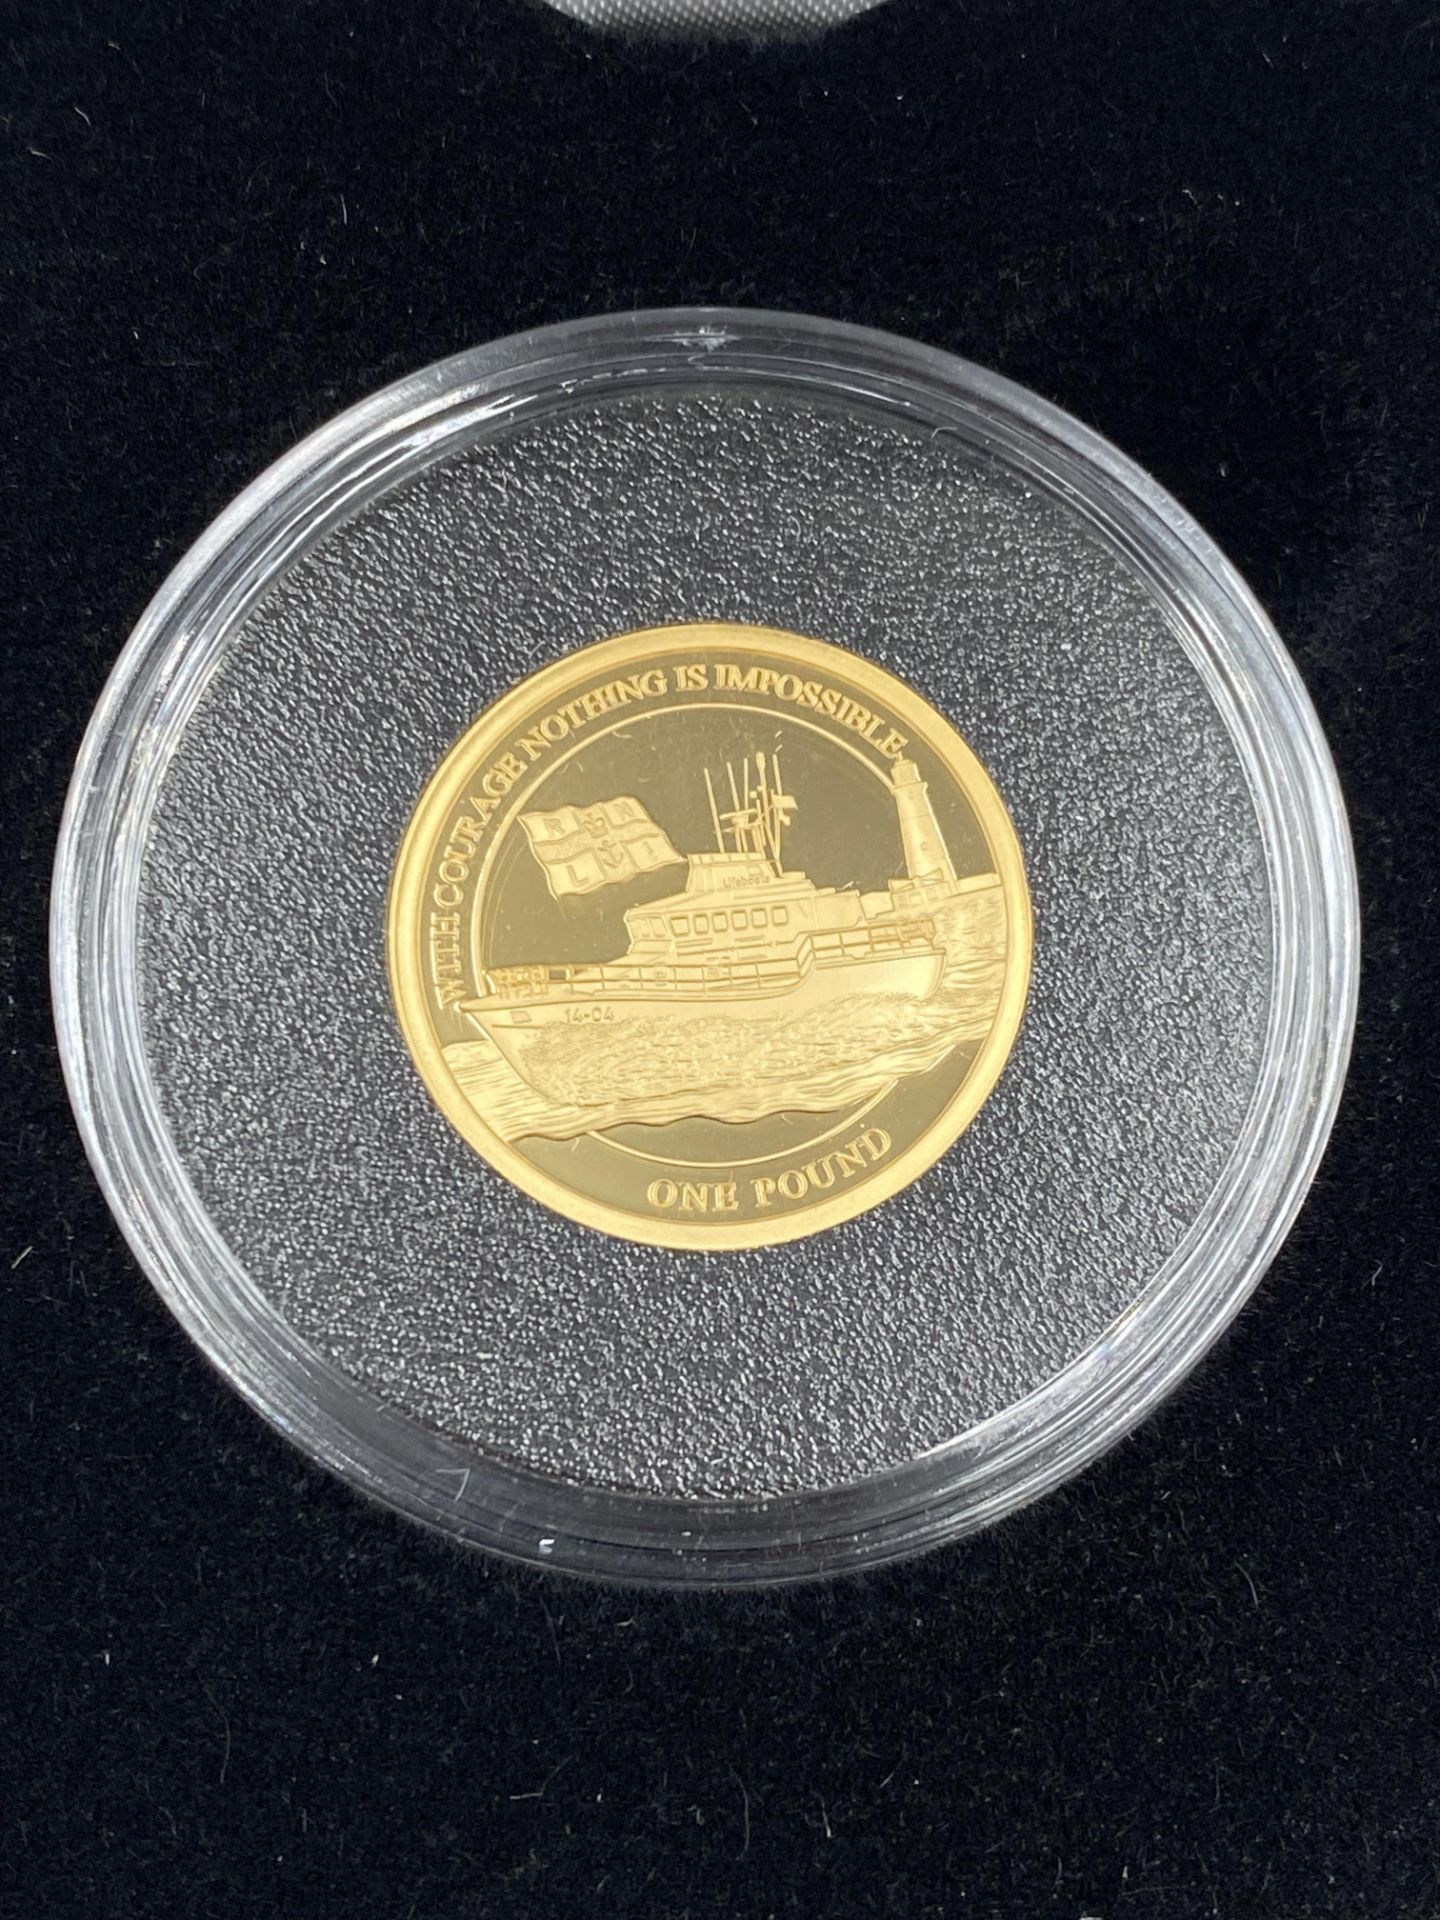 Jubilee Mint 2021 R.N.L.I 22ct gold proof £1 coin, 7.98gms - Image 2 of 4